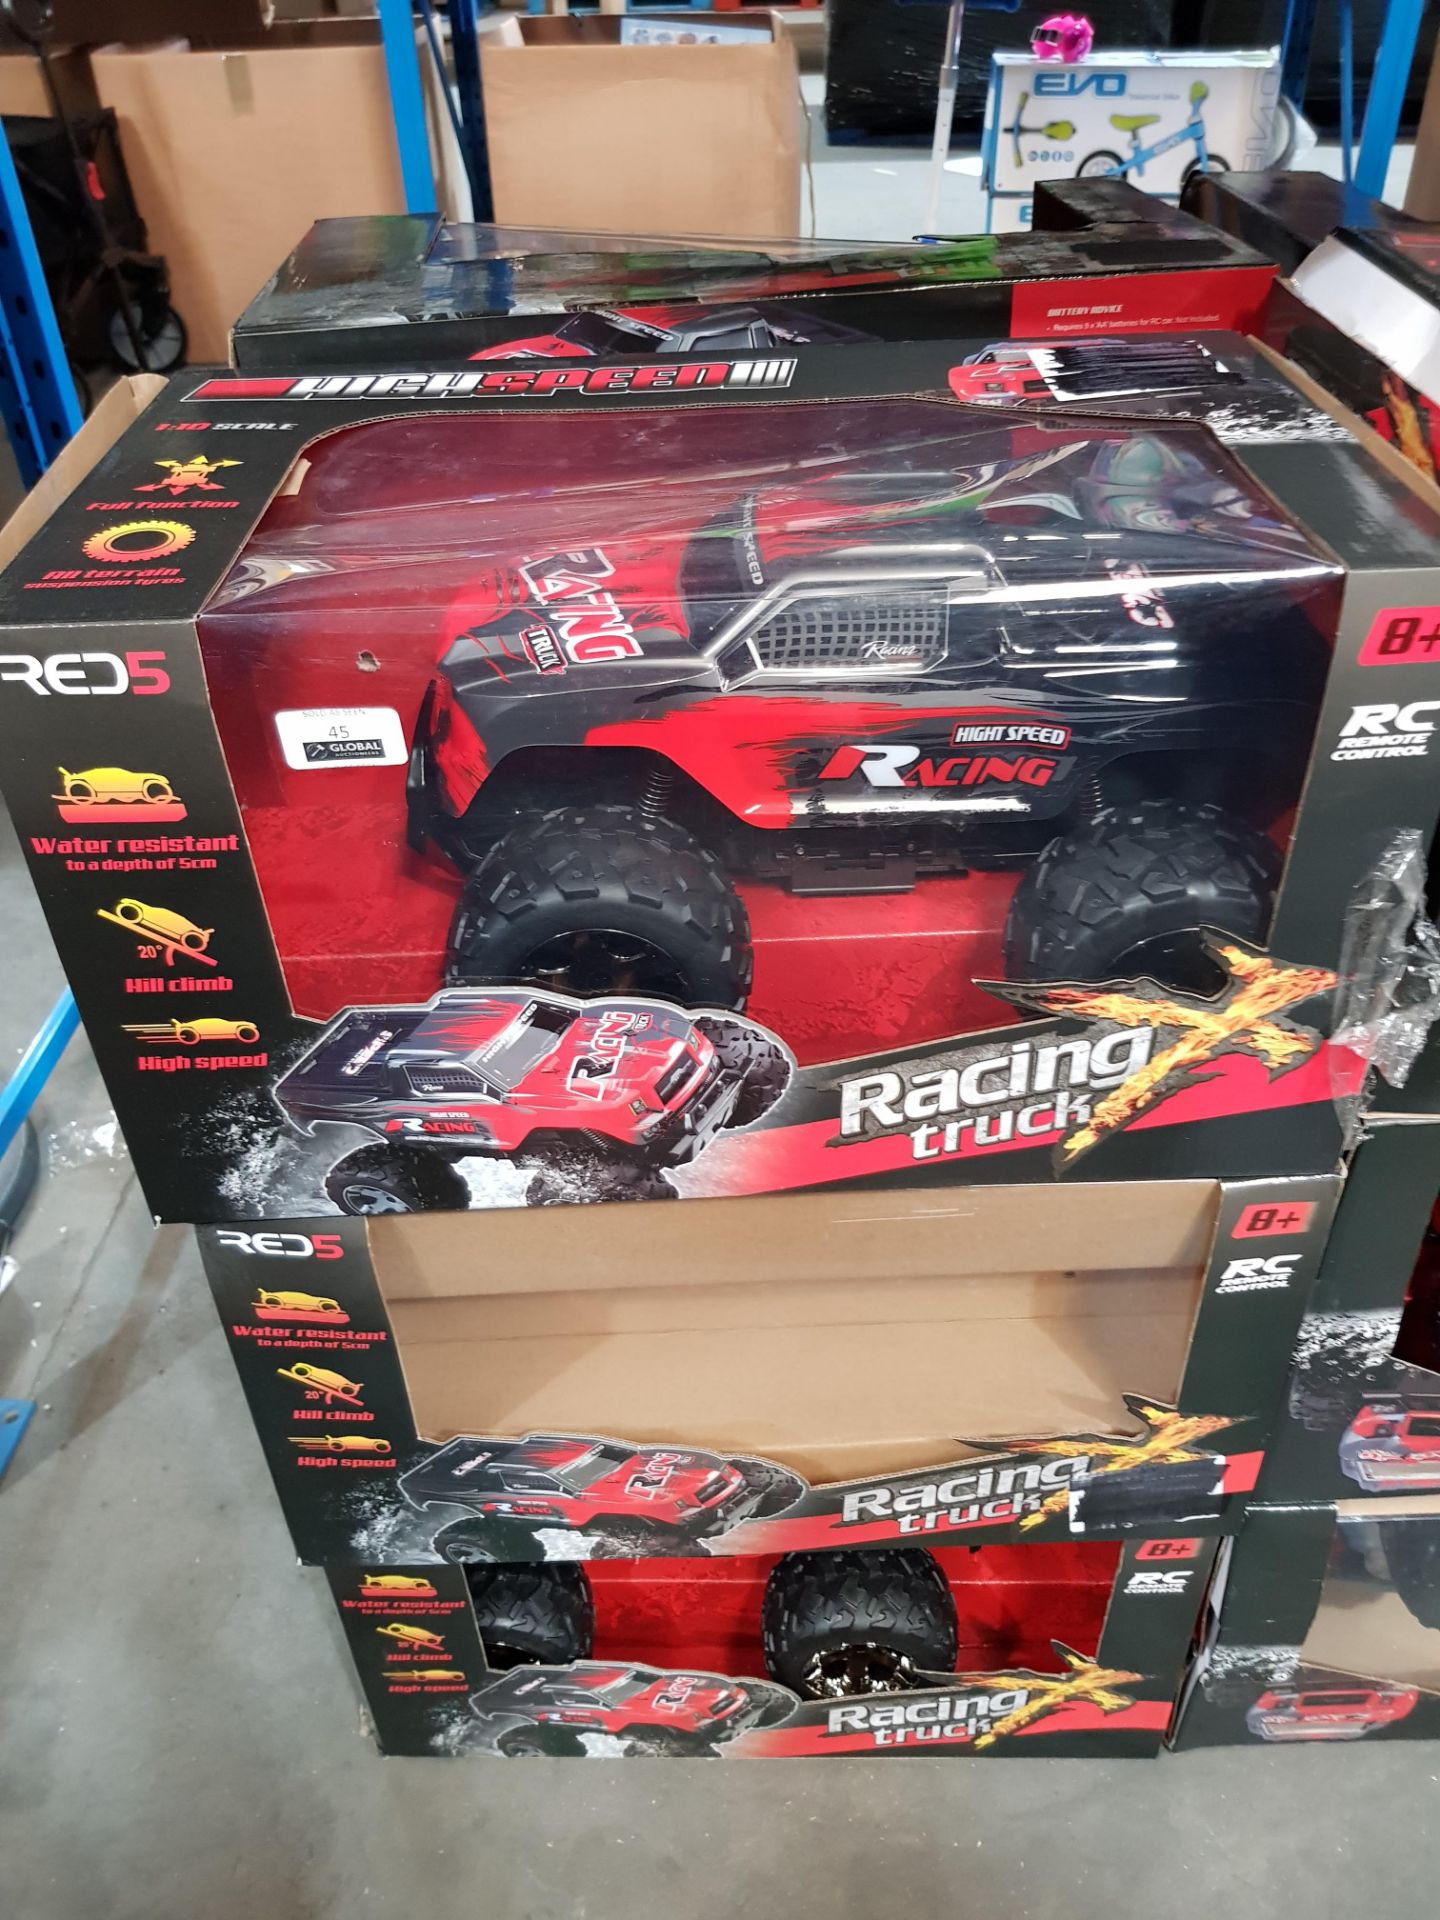 6 X RED5 RC RACING TRUCK